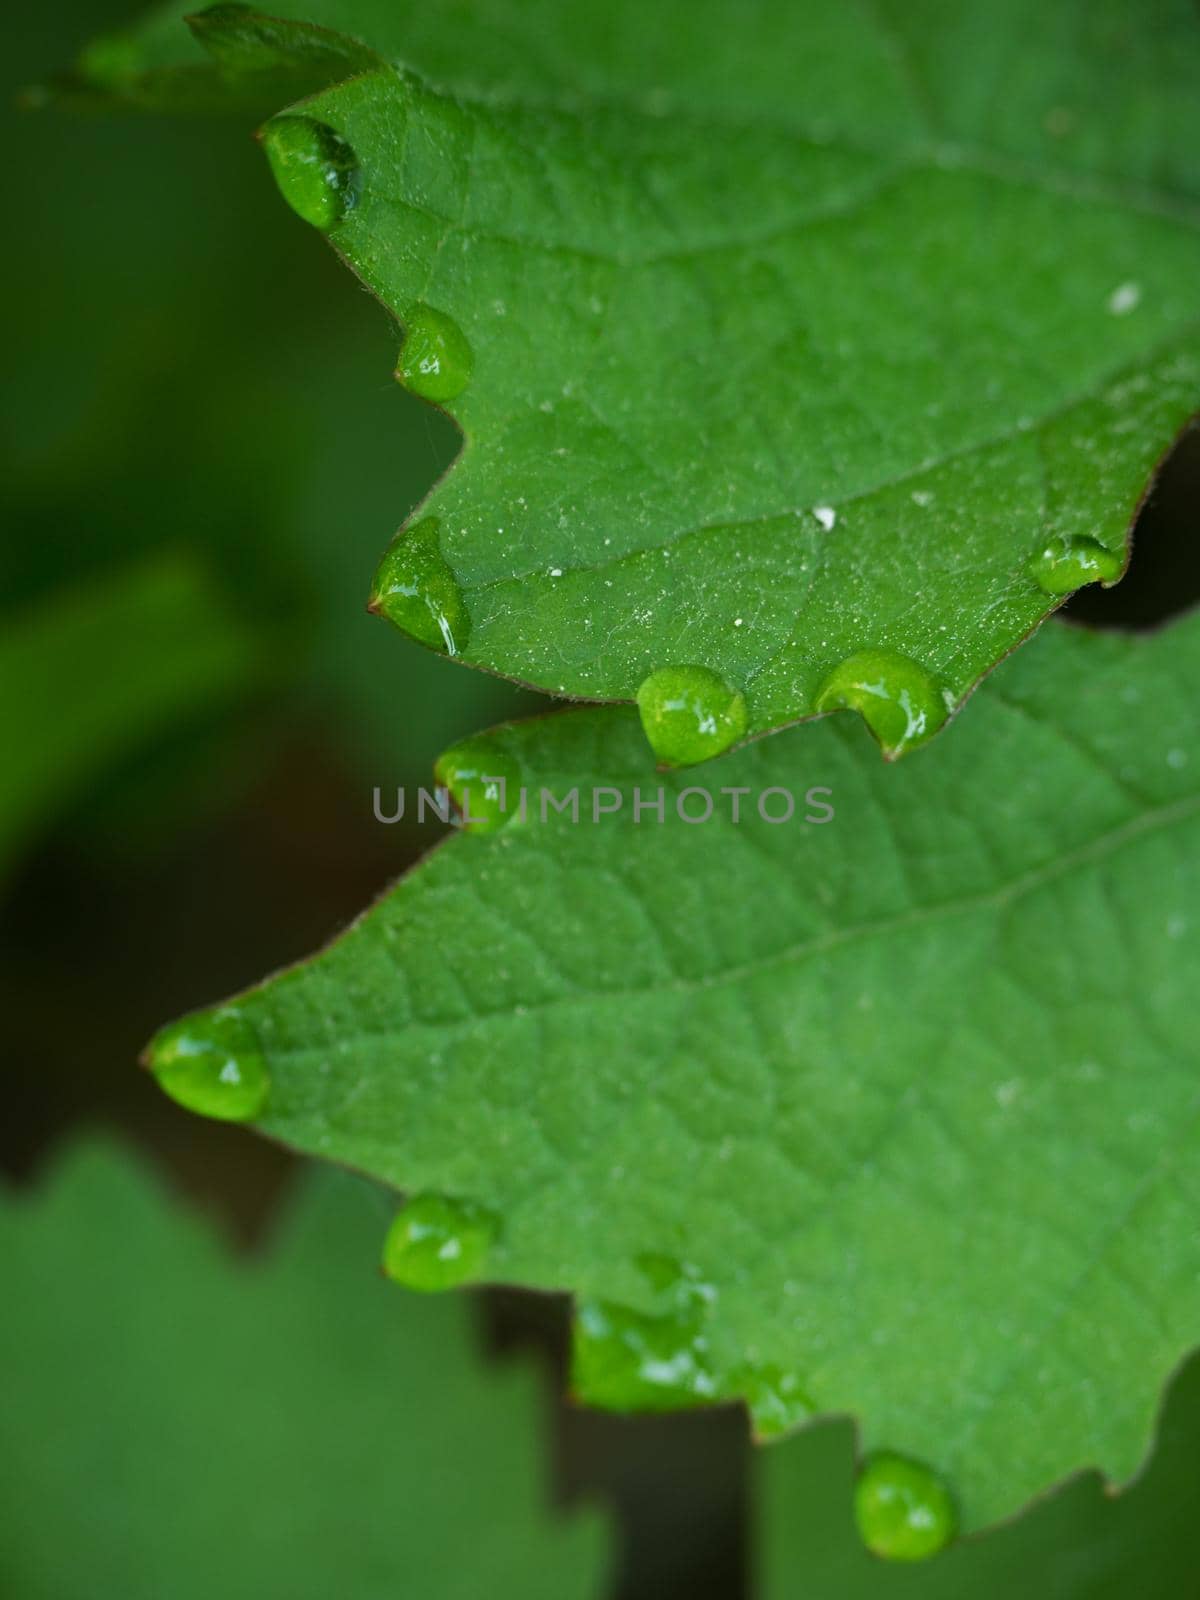 Few drops of dew on the tips of the green  leaves of the vine grapes by rdonar2